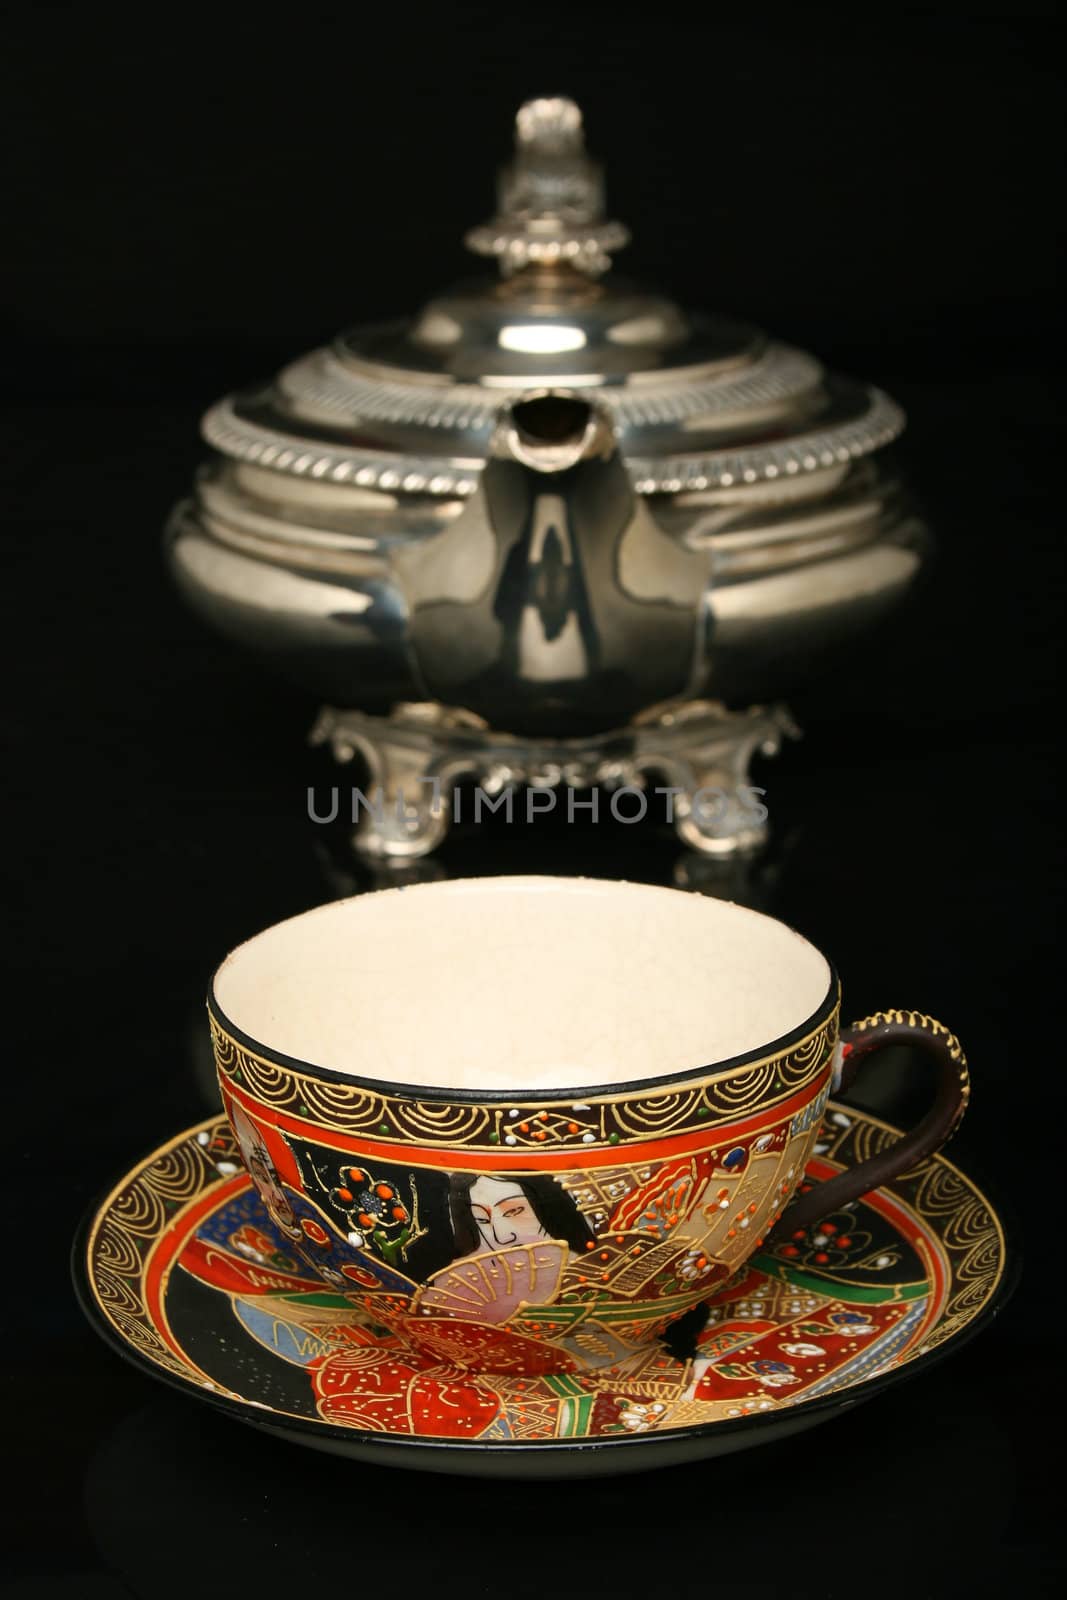 Silver teapot and an antique chinese cup of tea. More in gallery